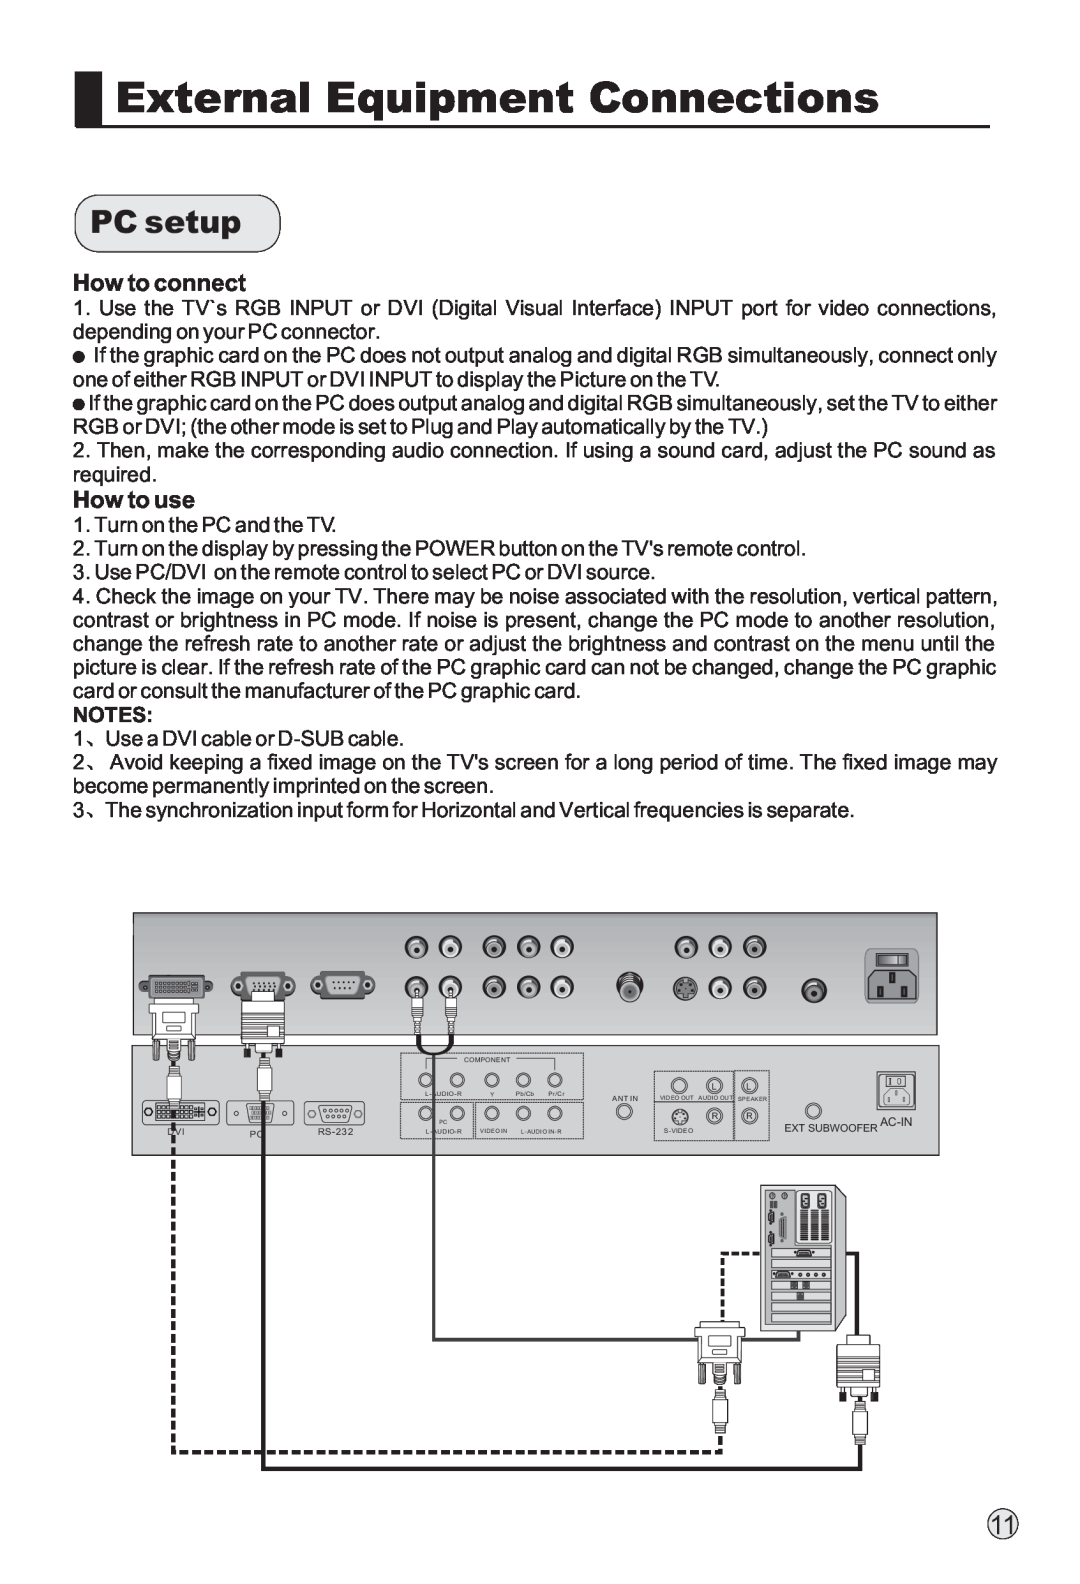 Haier P42SV6-C1 owner manual PC setup, External Equipment Connections, How to connect, How to use 